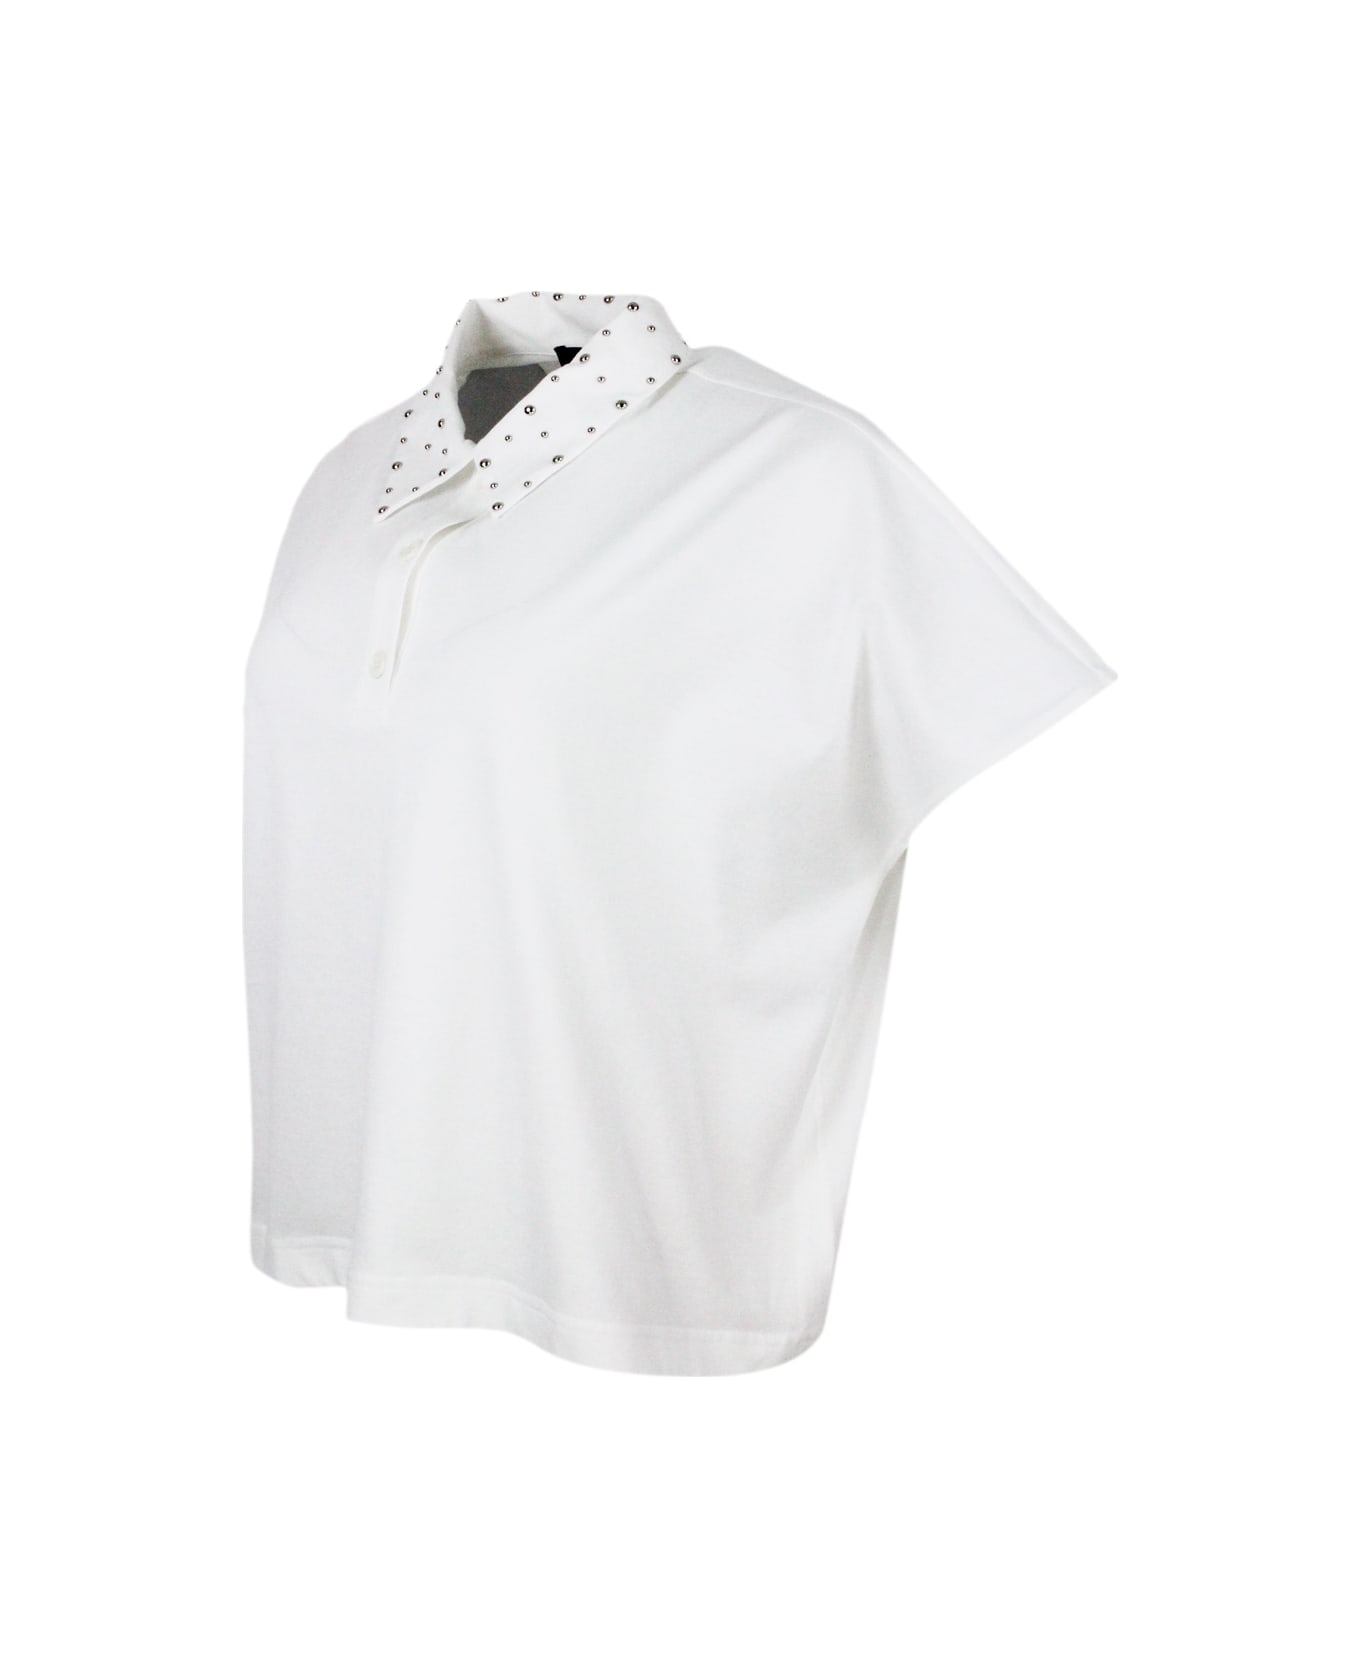 Fabiana Filippi 3-button Short-sleeved Cotton Jersey Polo Shirt Embellished With Studs On The Collar - White ポロシャツ